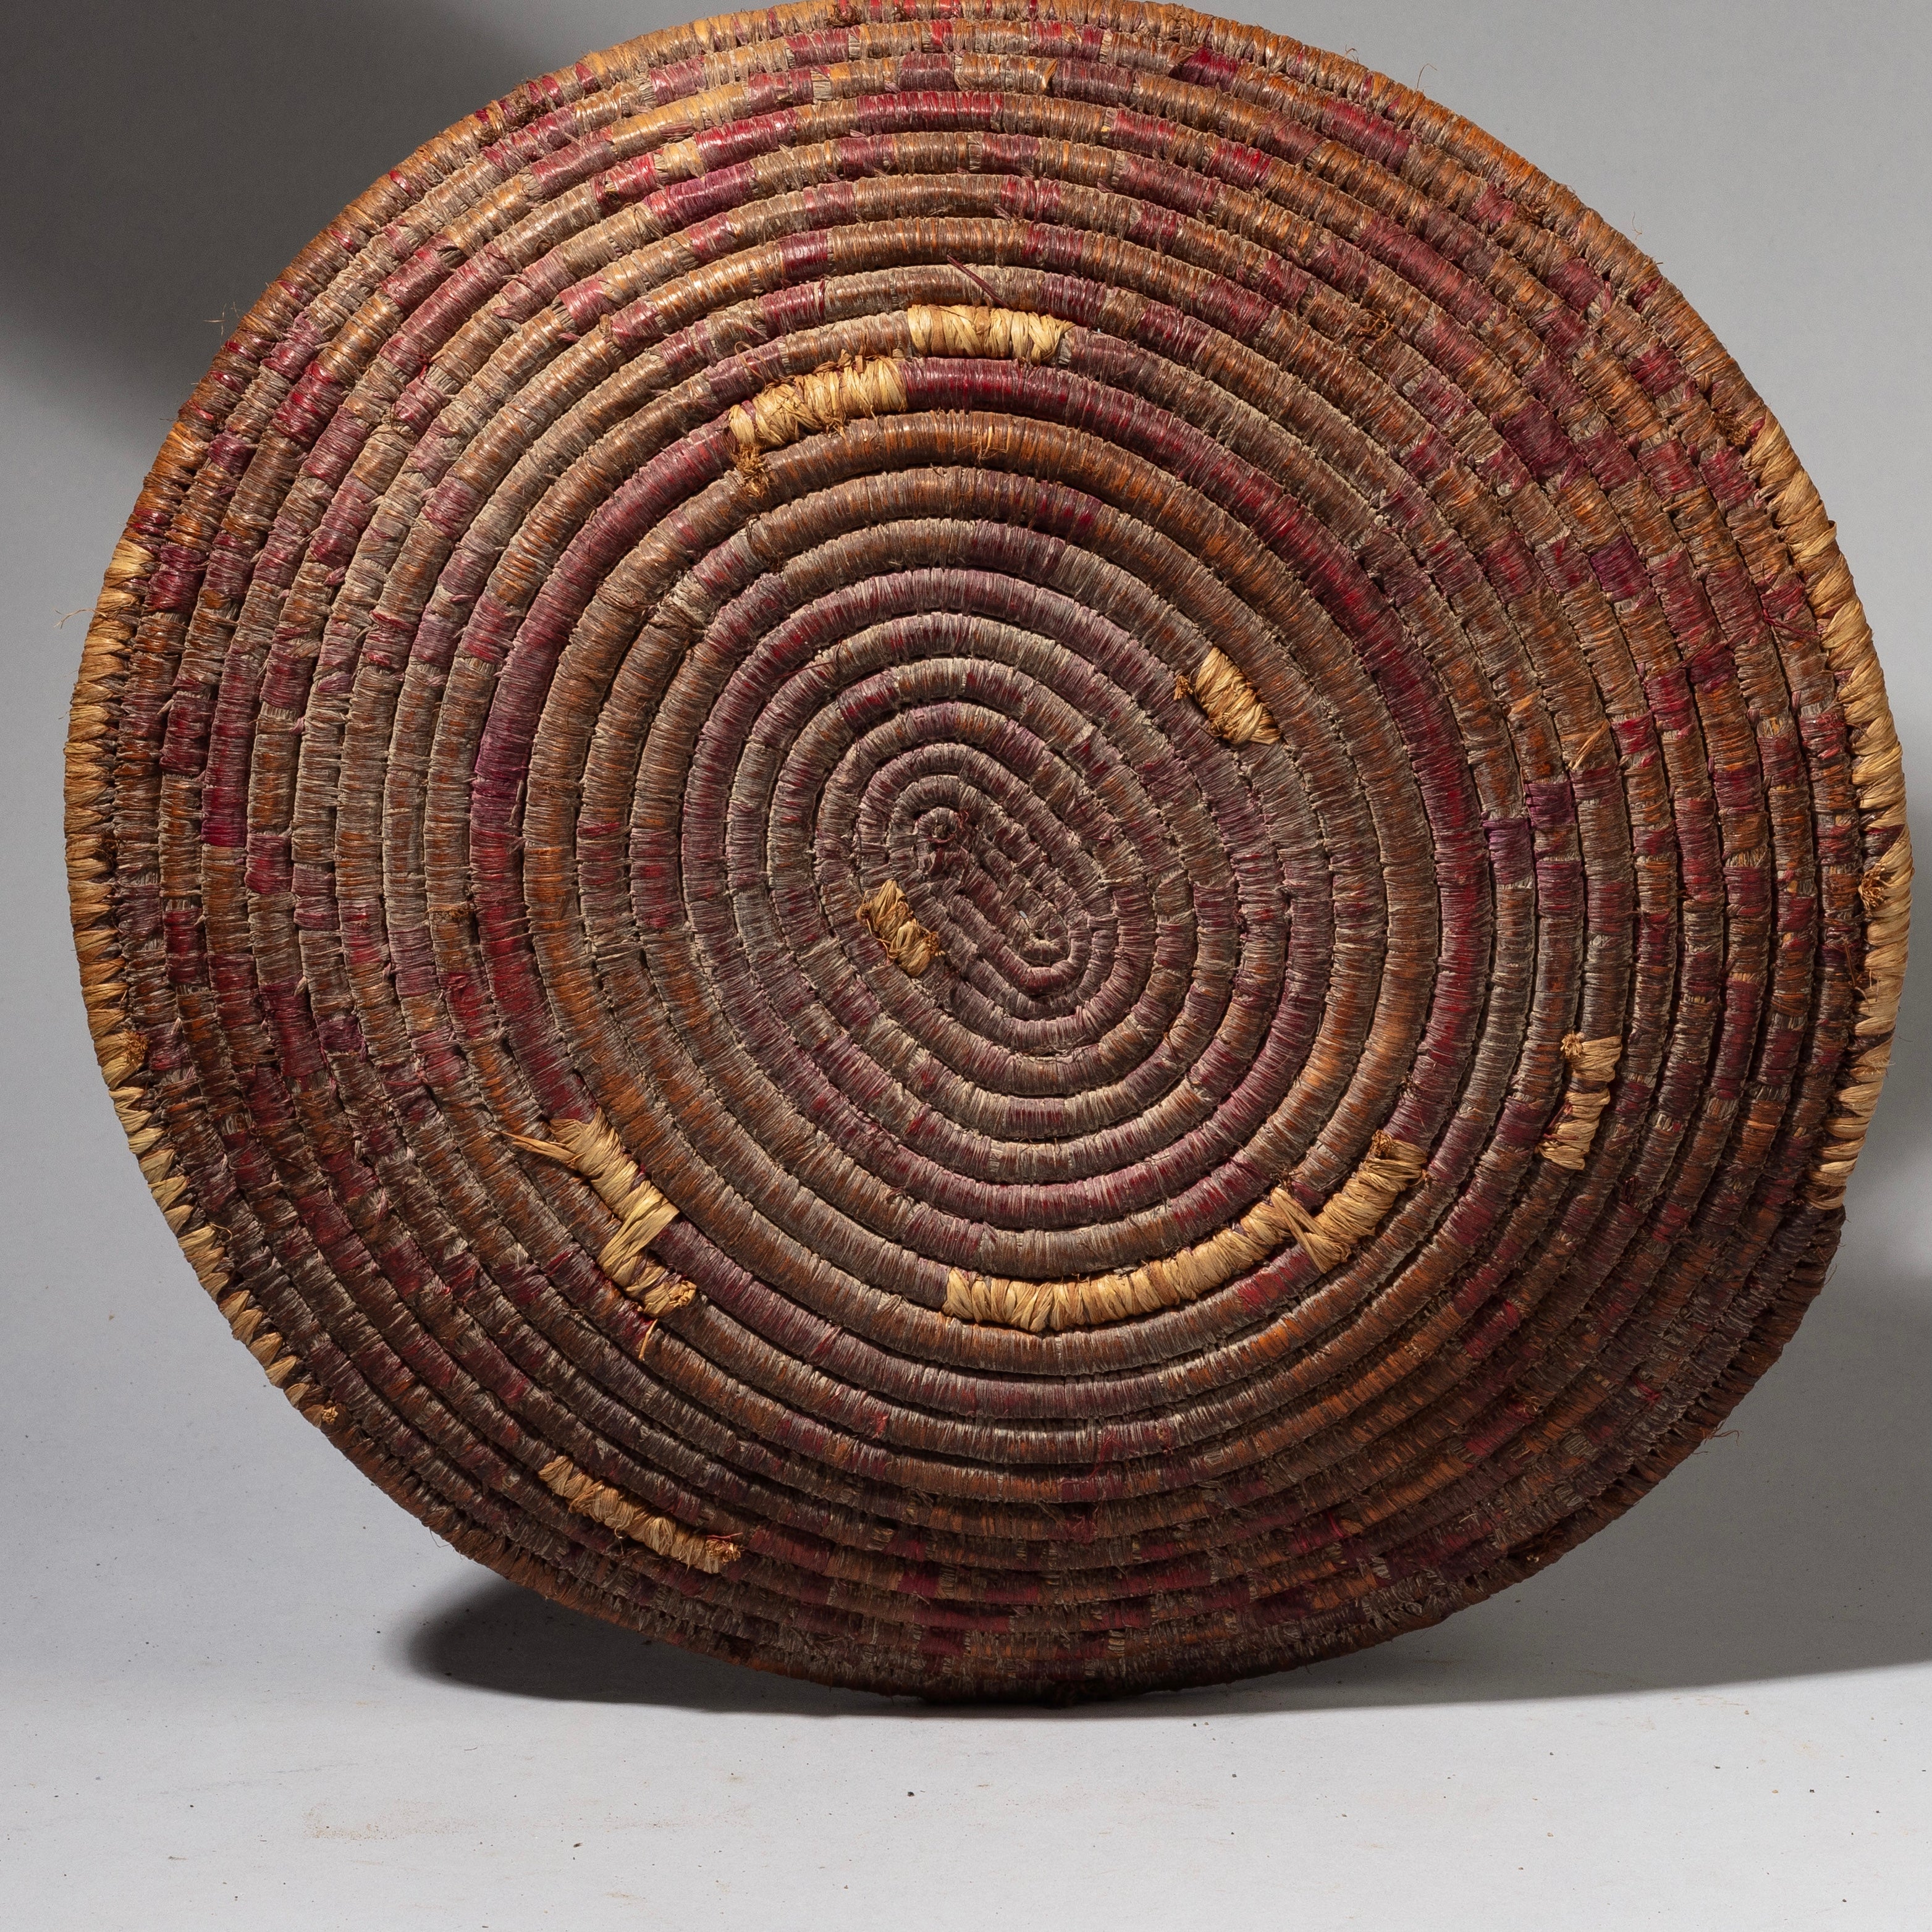 A WOVEN FIBRE BASKET WITH RED DESIGN FROM TUTSI TRIBE RWANDA( No 2177)